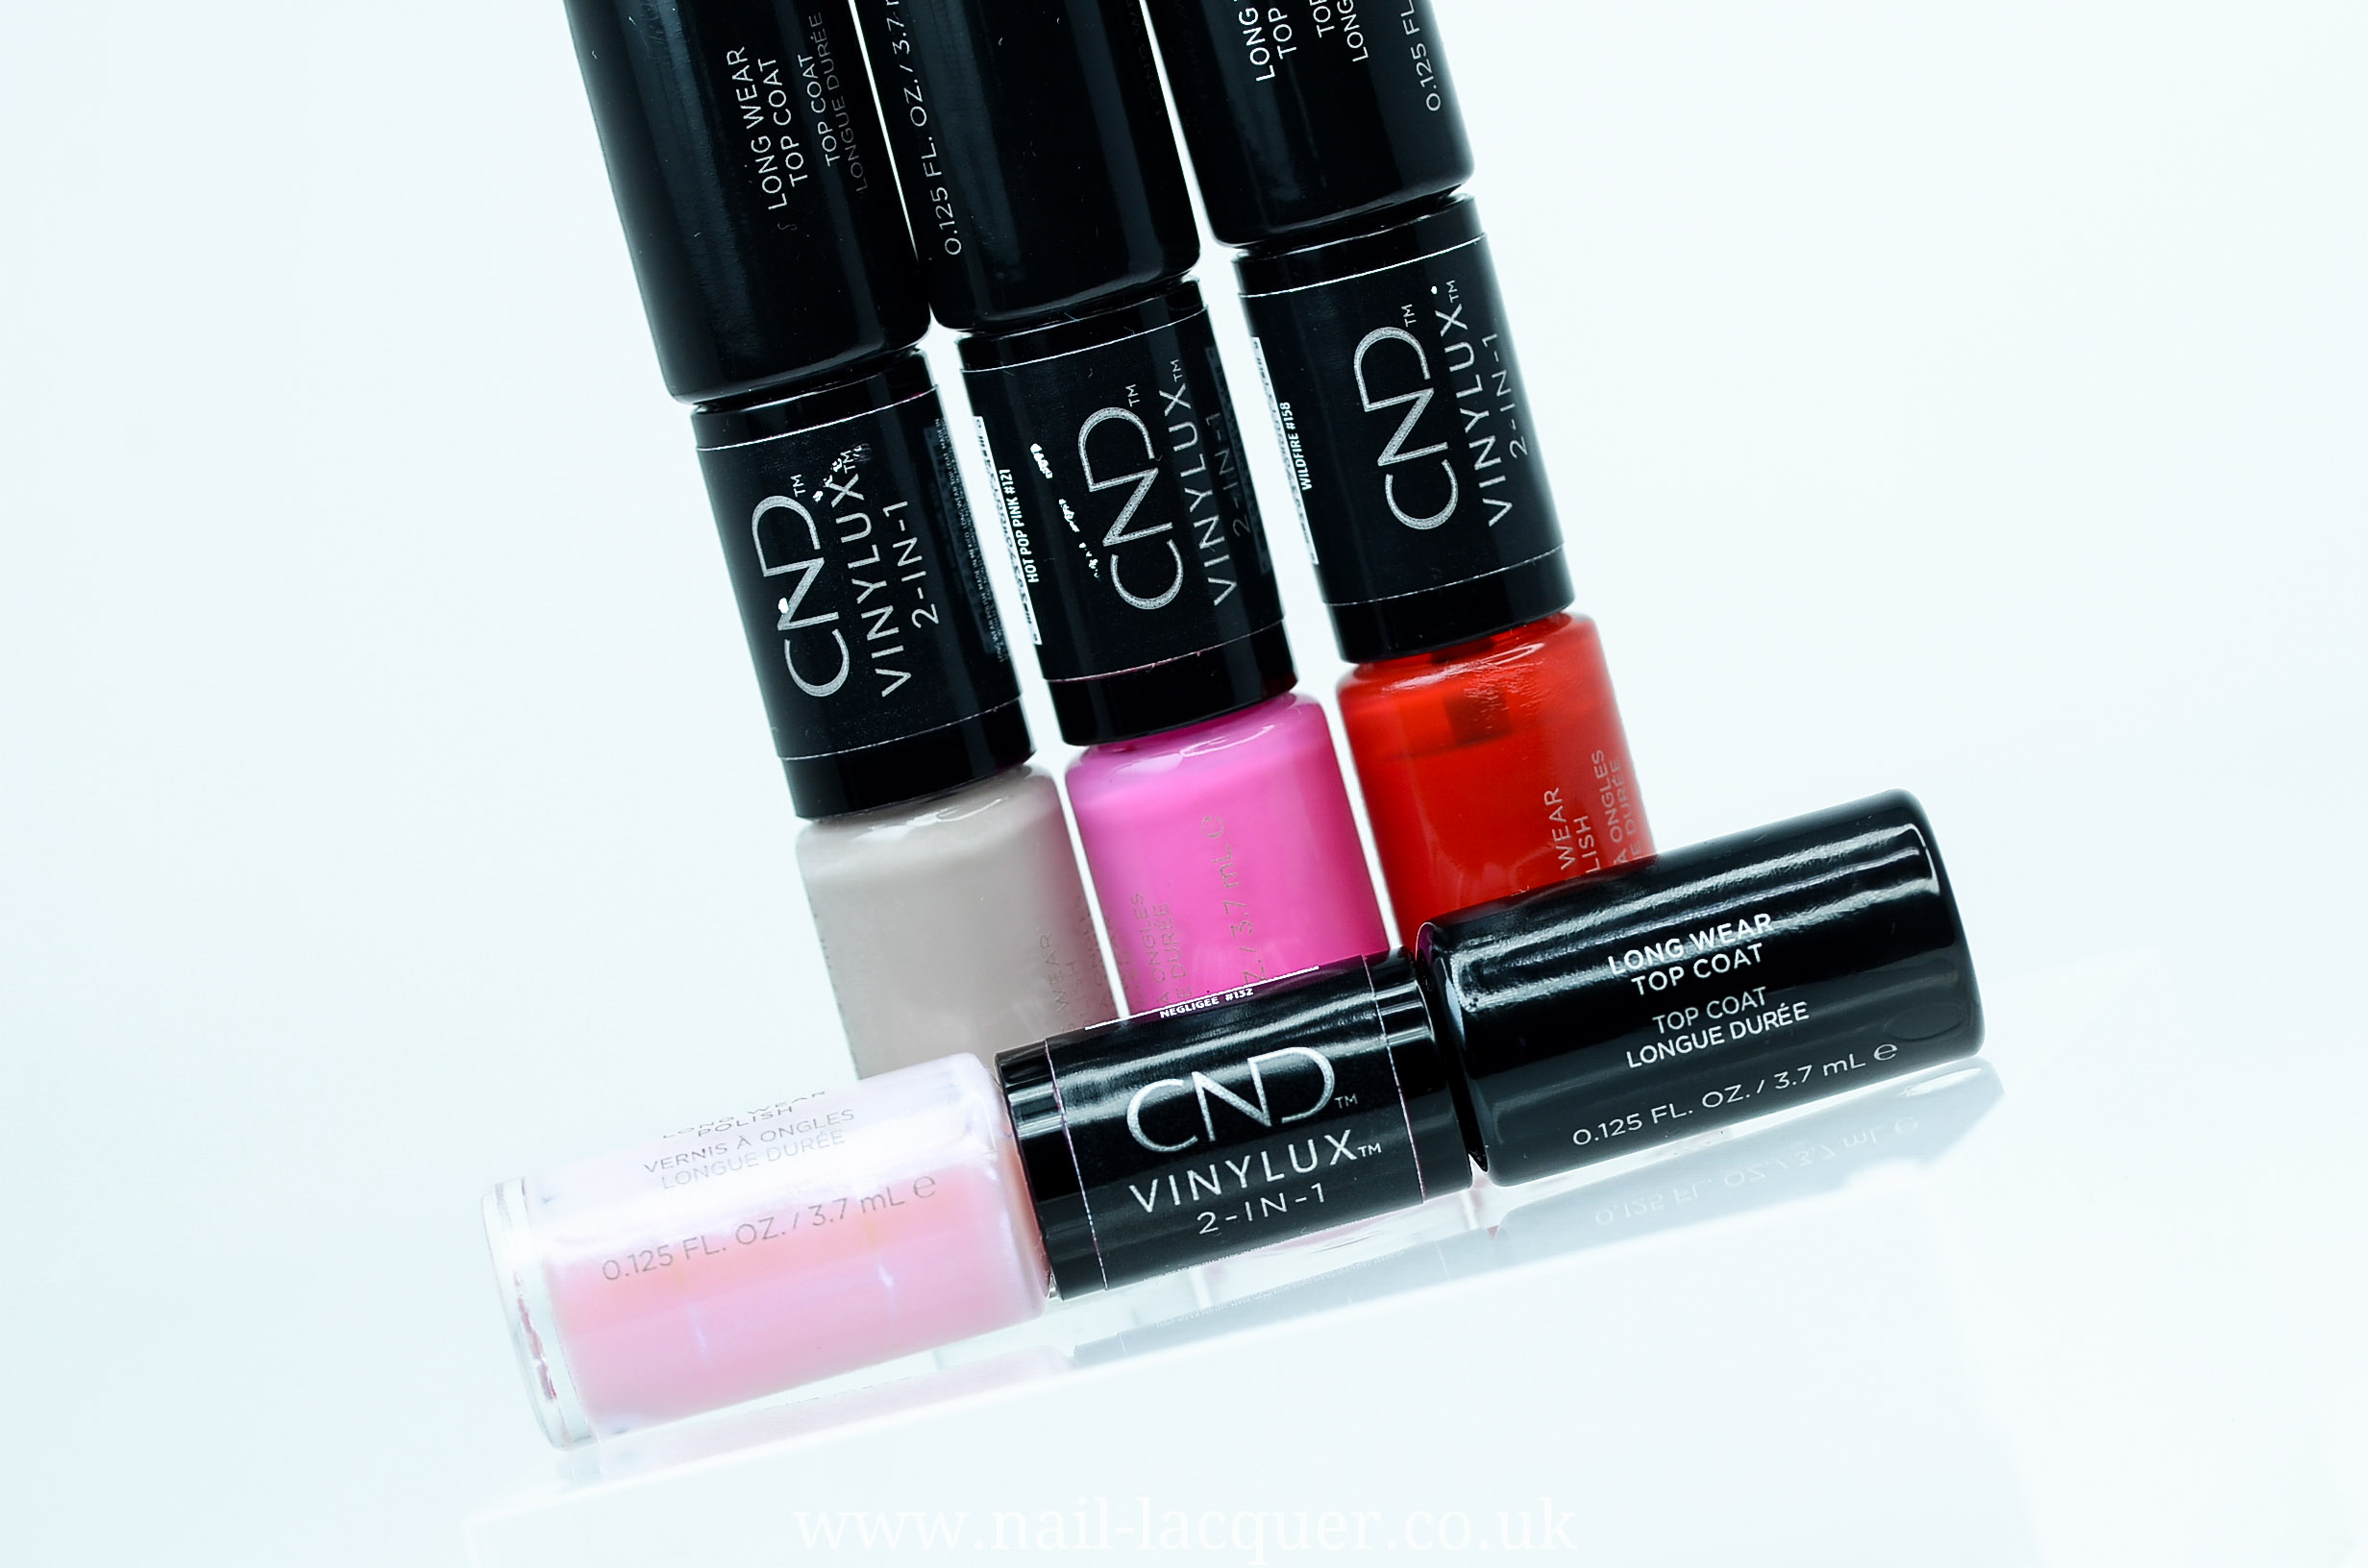 9. CND Vinylux Long Wear Nail Polish in "A Touch of Color" - wide 4